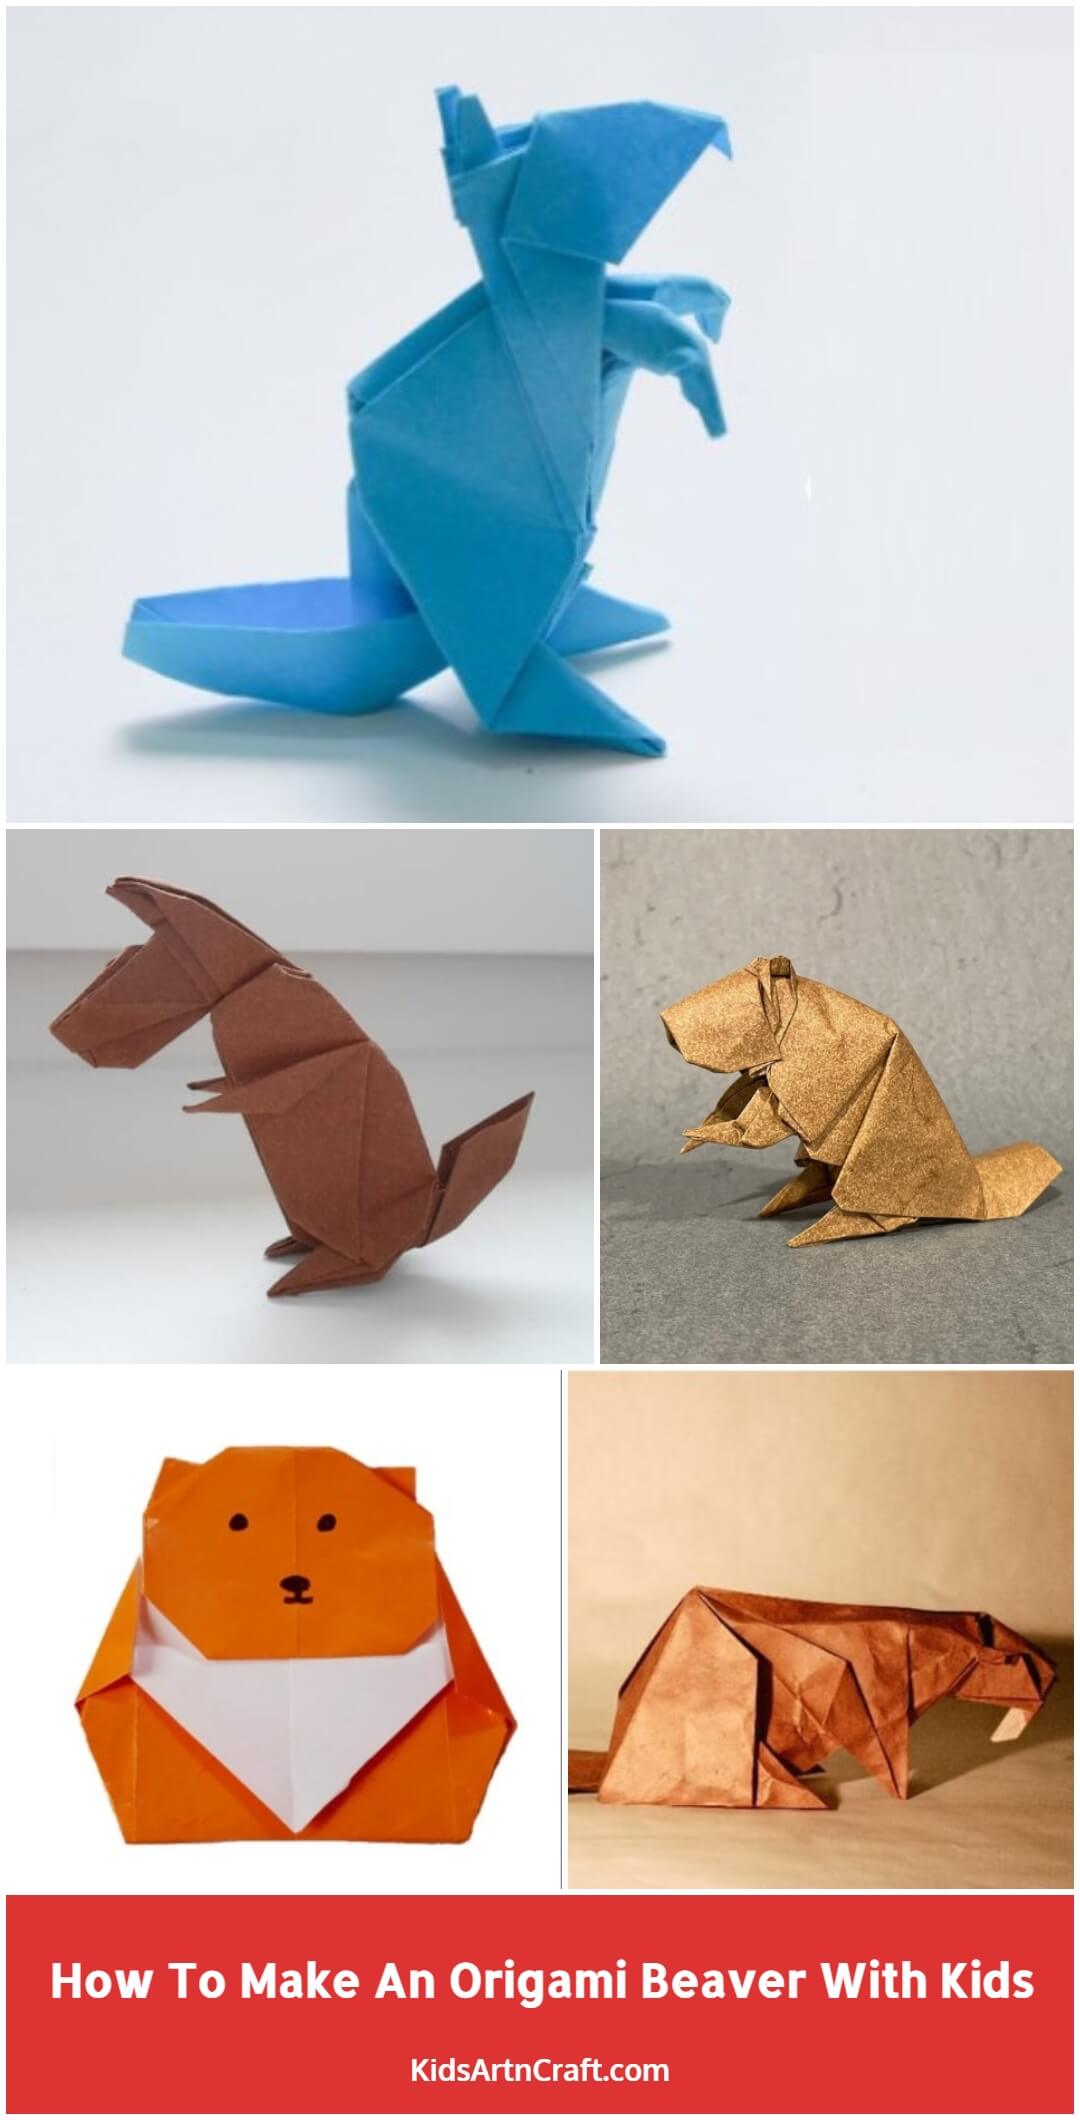 How To Make An Origami Beaver With Kids